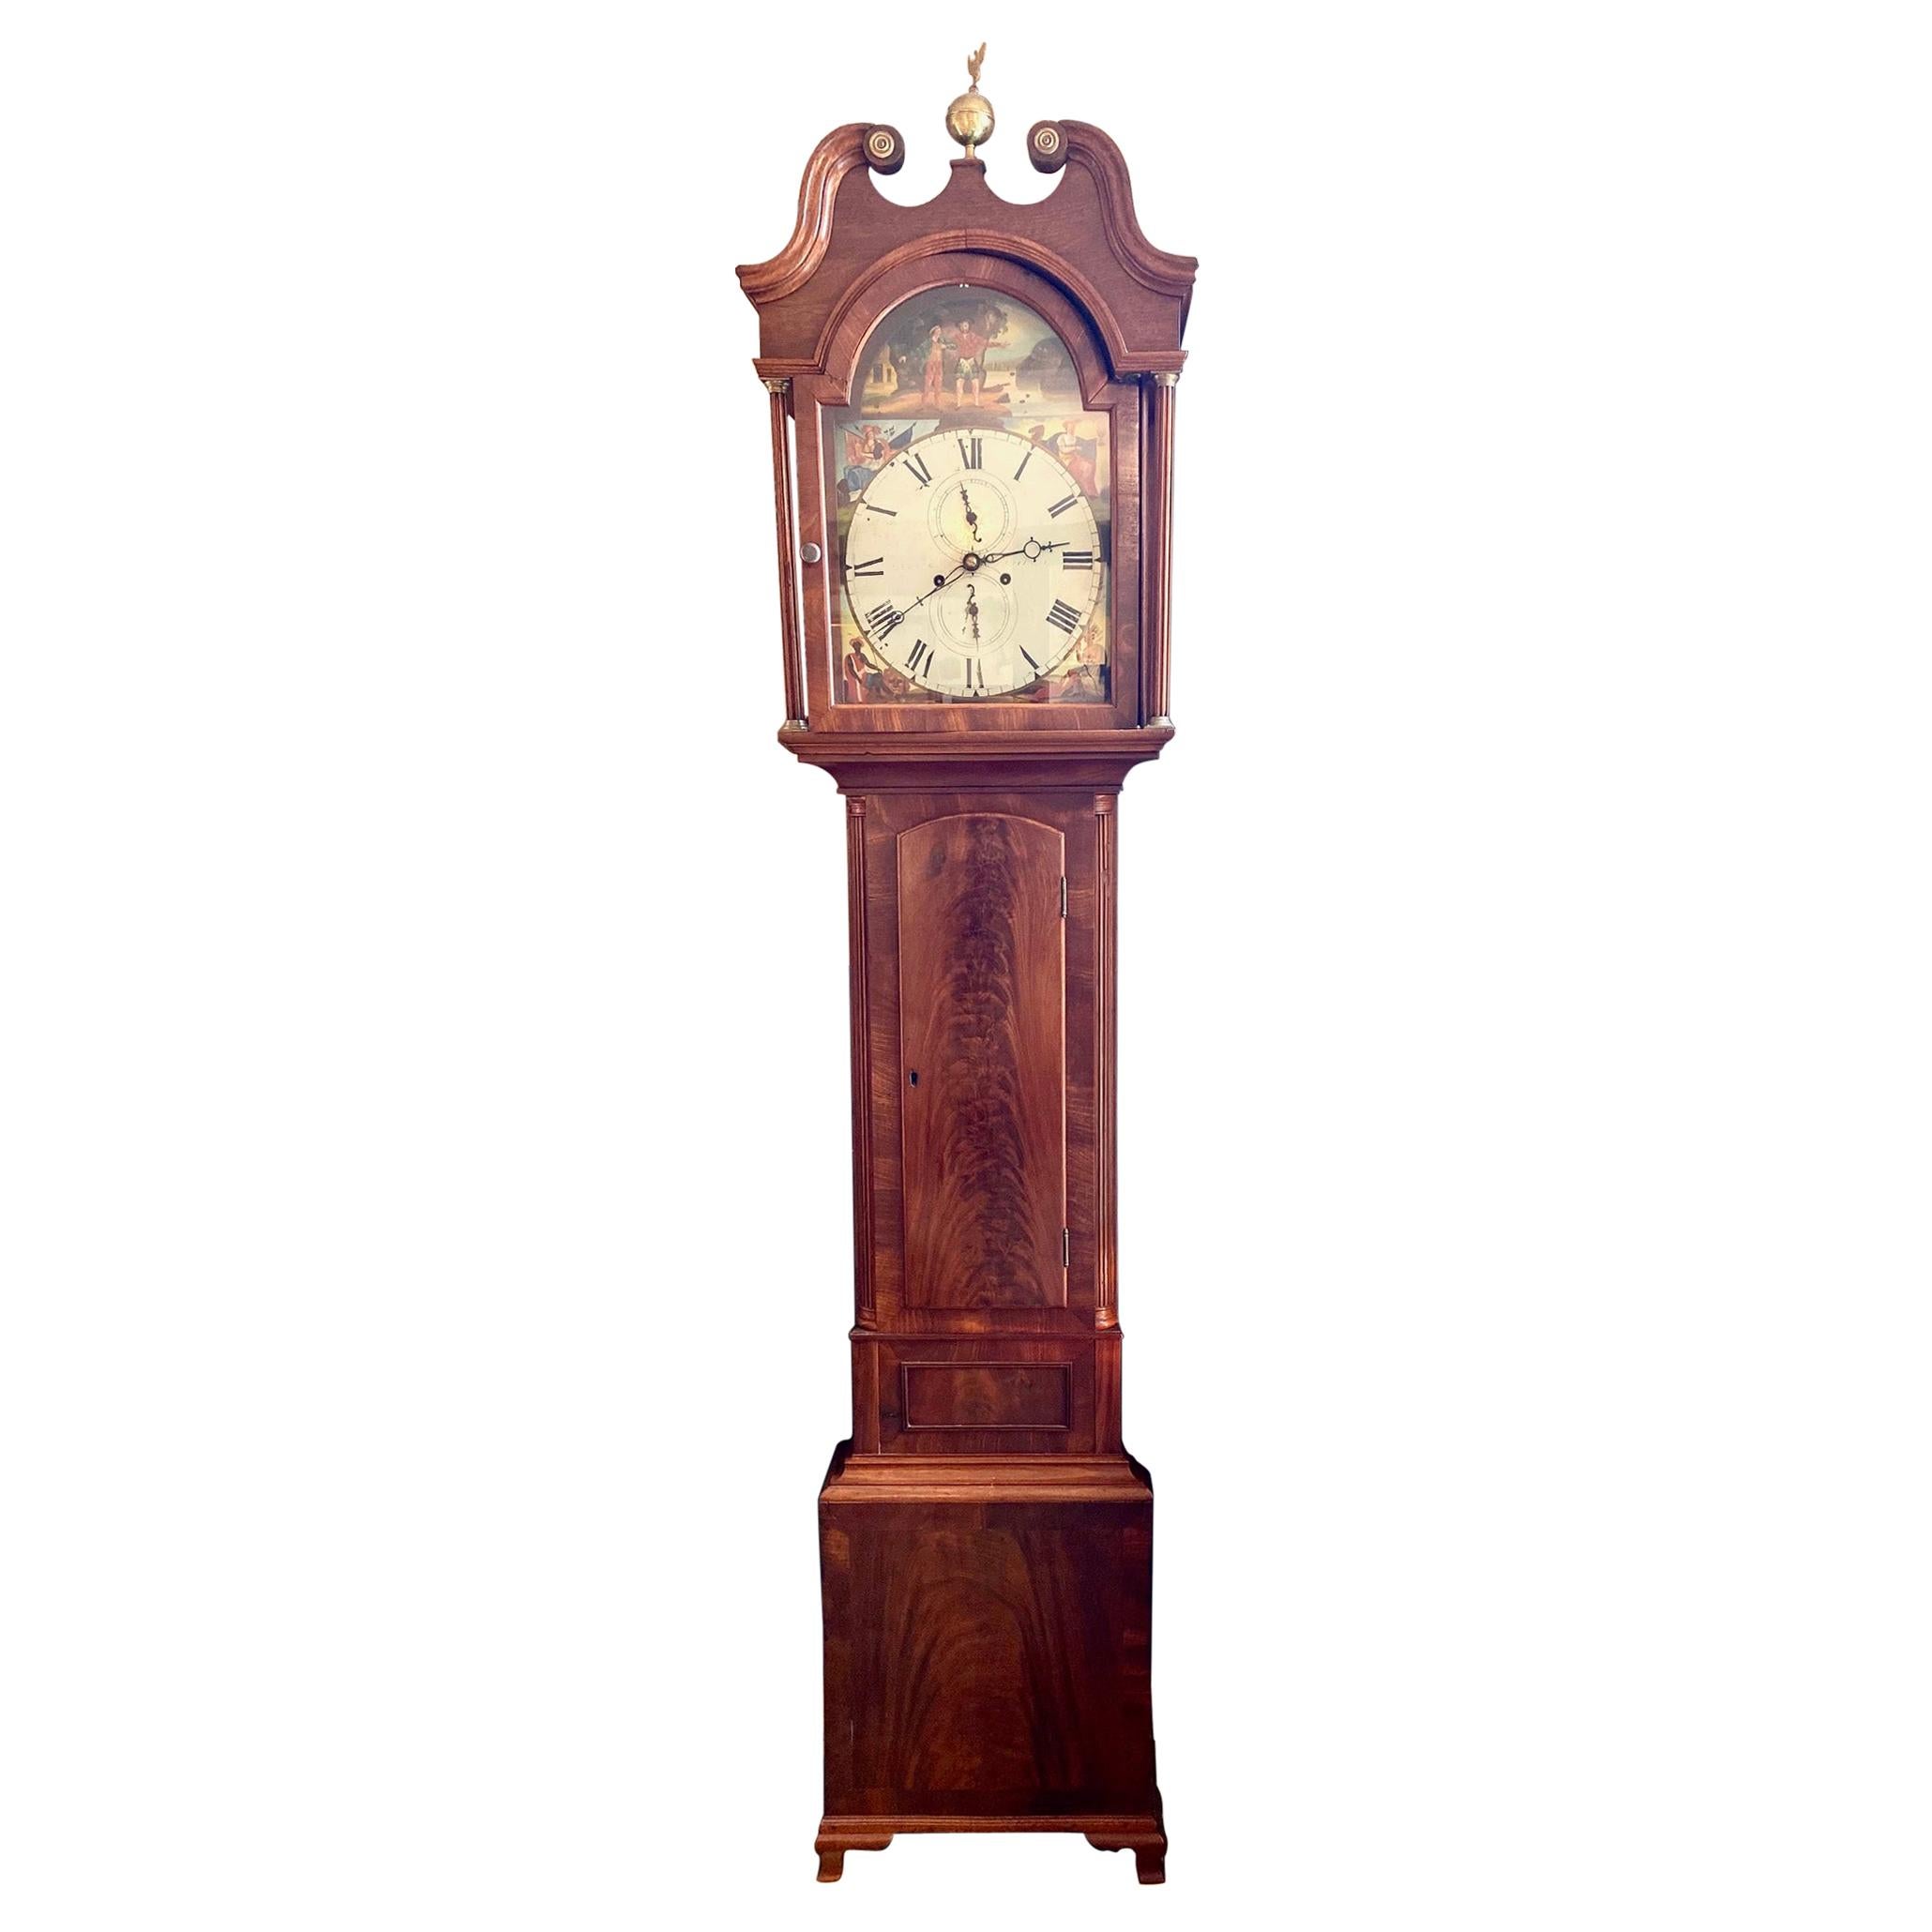 Early 19th Century Tall Case Clock by James Hogg, circa 1820